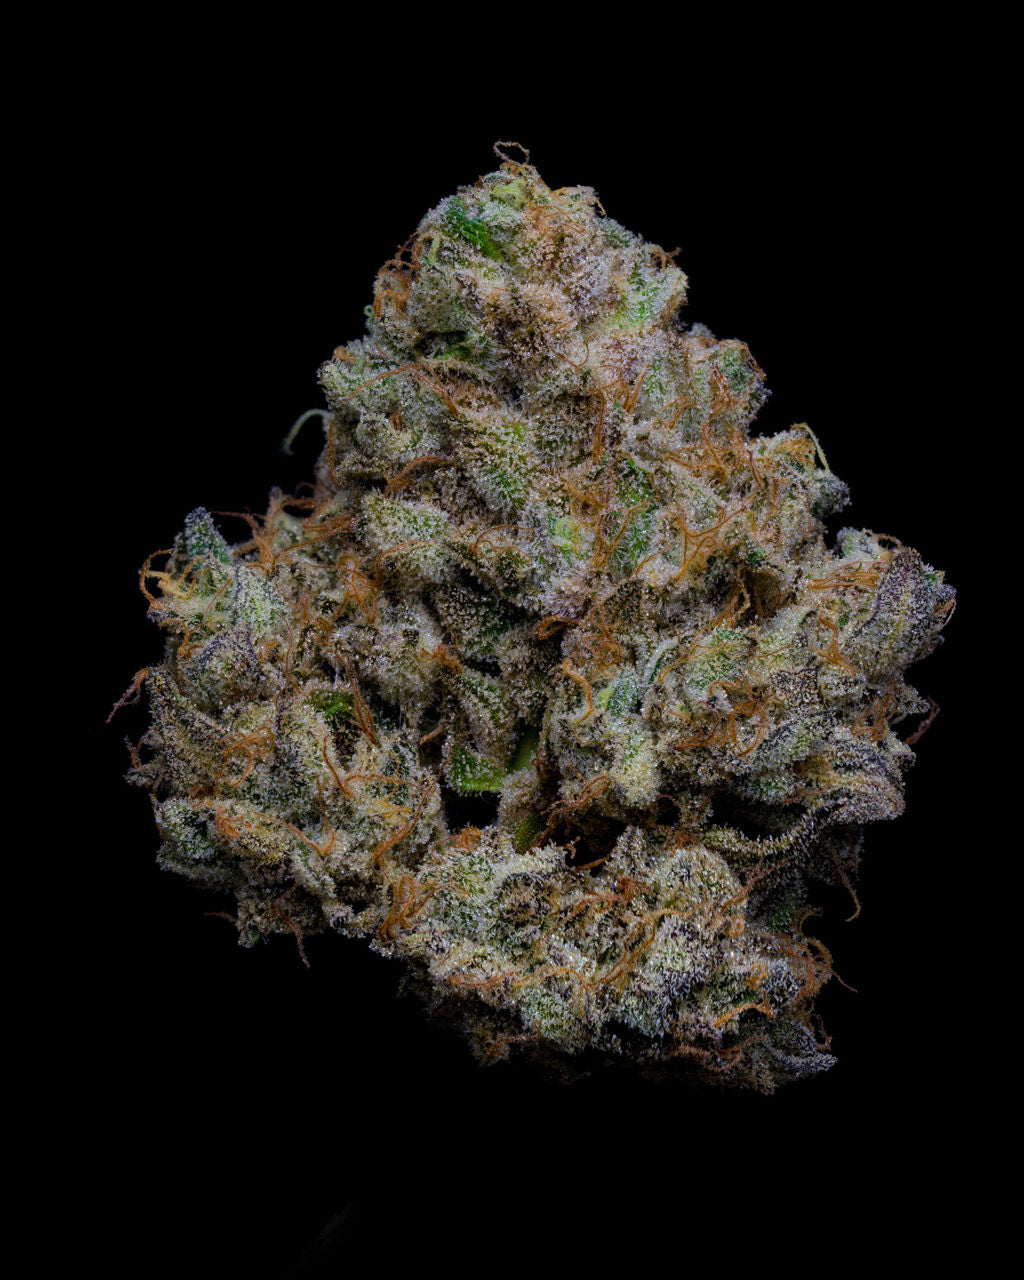 A nug of cannabis flower from the King Louis XIII strain sits against a black background.